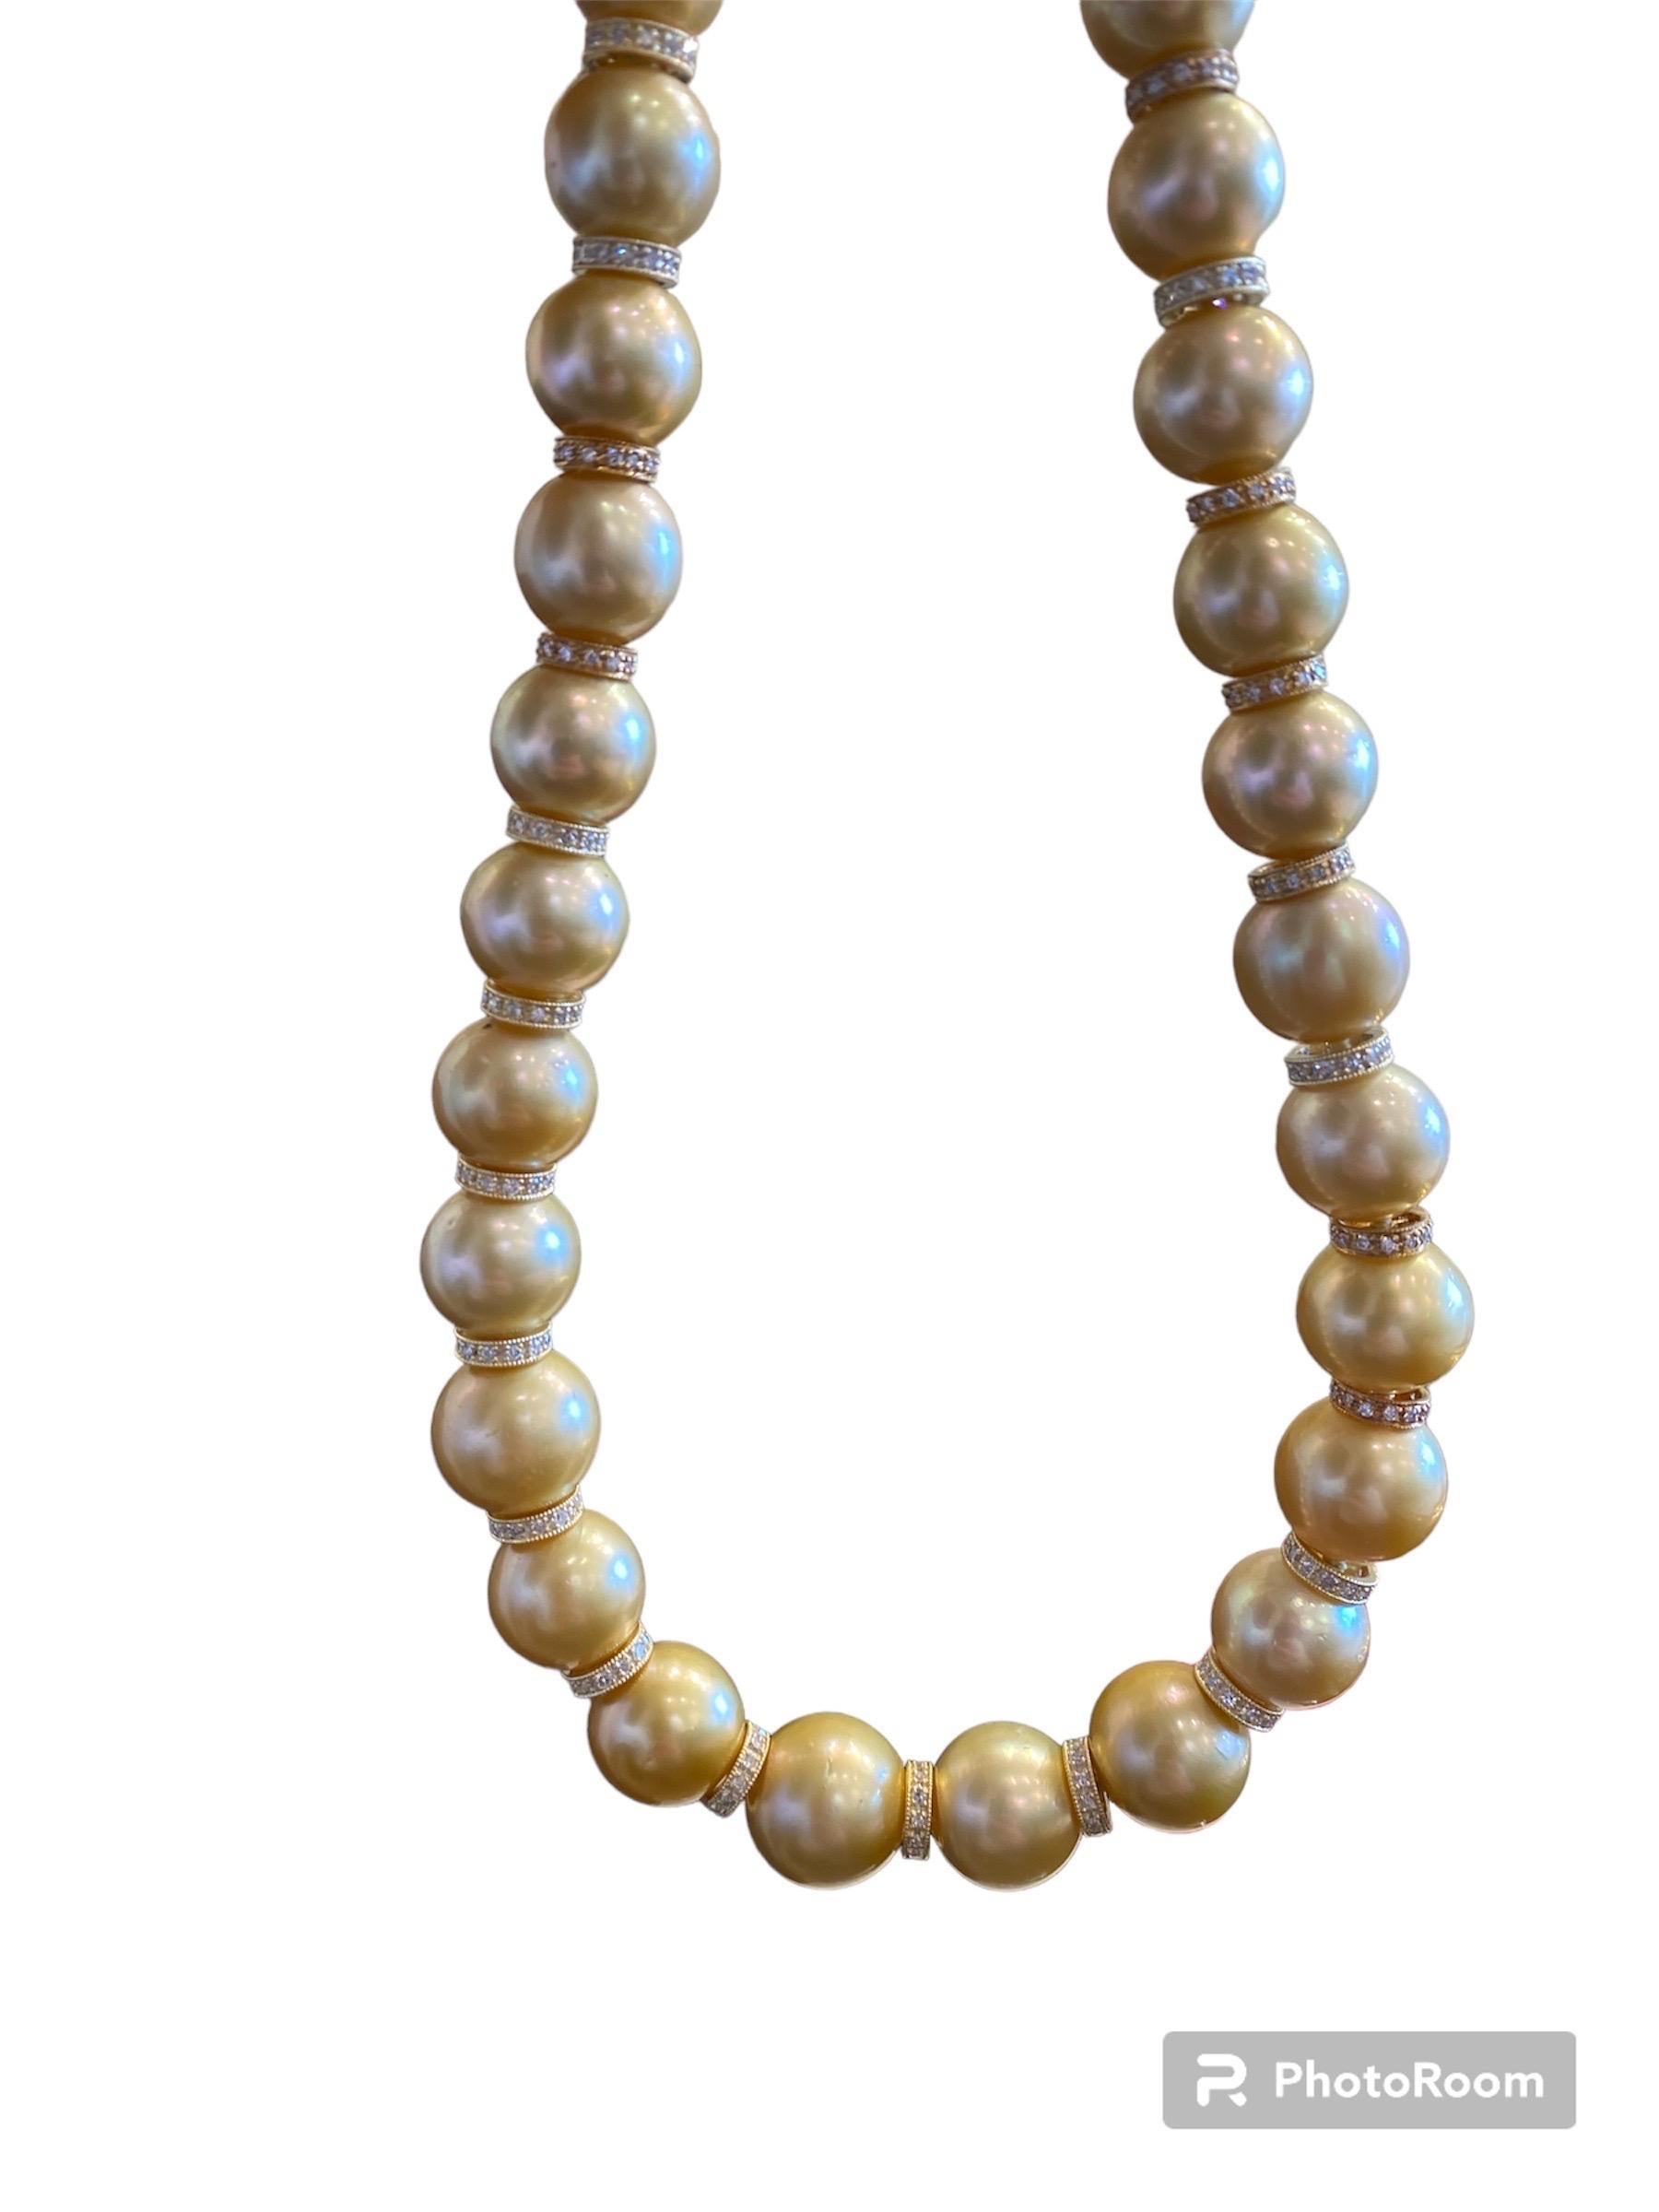 This exquisite strand of semi-baroque, roundish golden South Seas pearls is absolutely stunning! Included gorgeous pearls graduating in diameter from 13.00mm to 15.00mm, all with superior luster. They have been hand strung on golden silk thread,